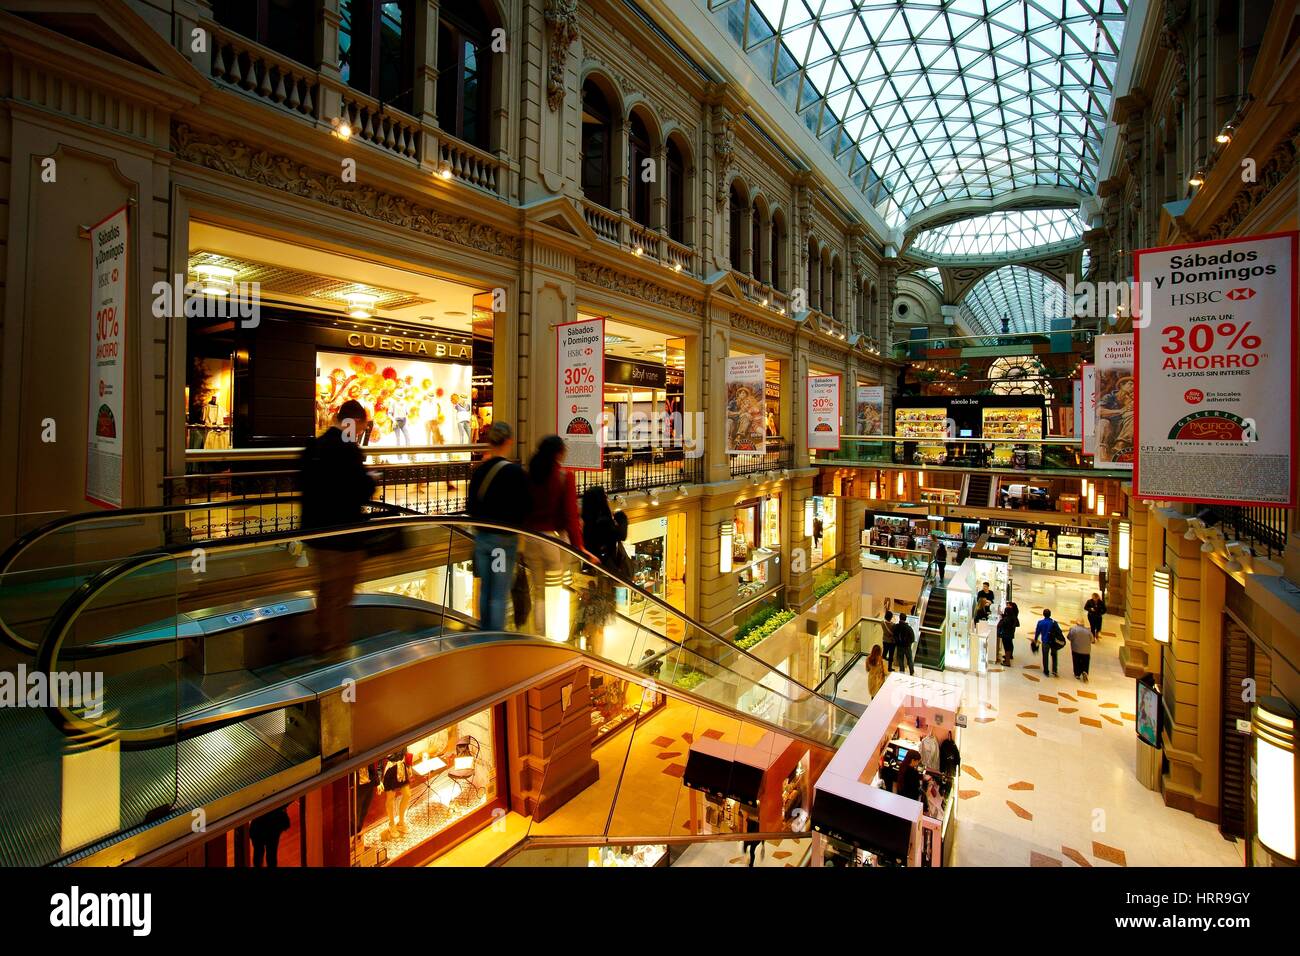 Galerias Pacifico-Shopping-Mall, Buenos Aires, Argentinien Stockfoto